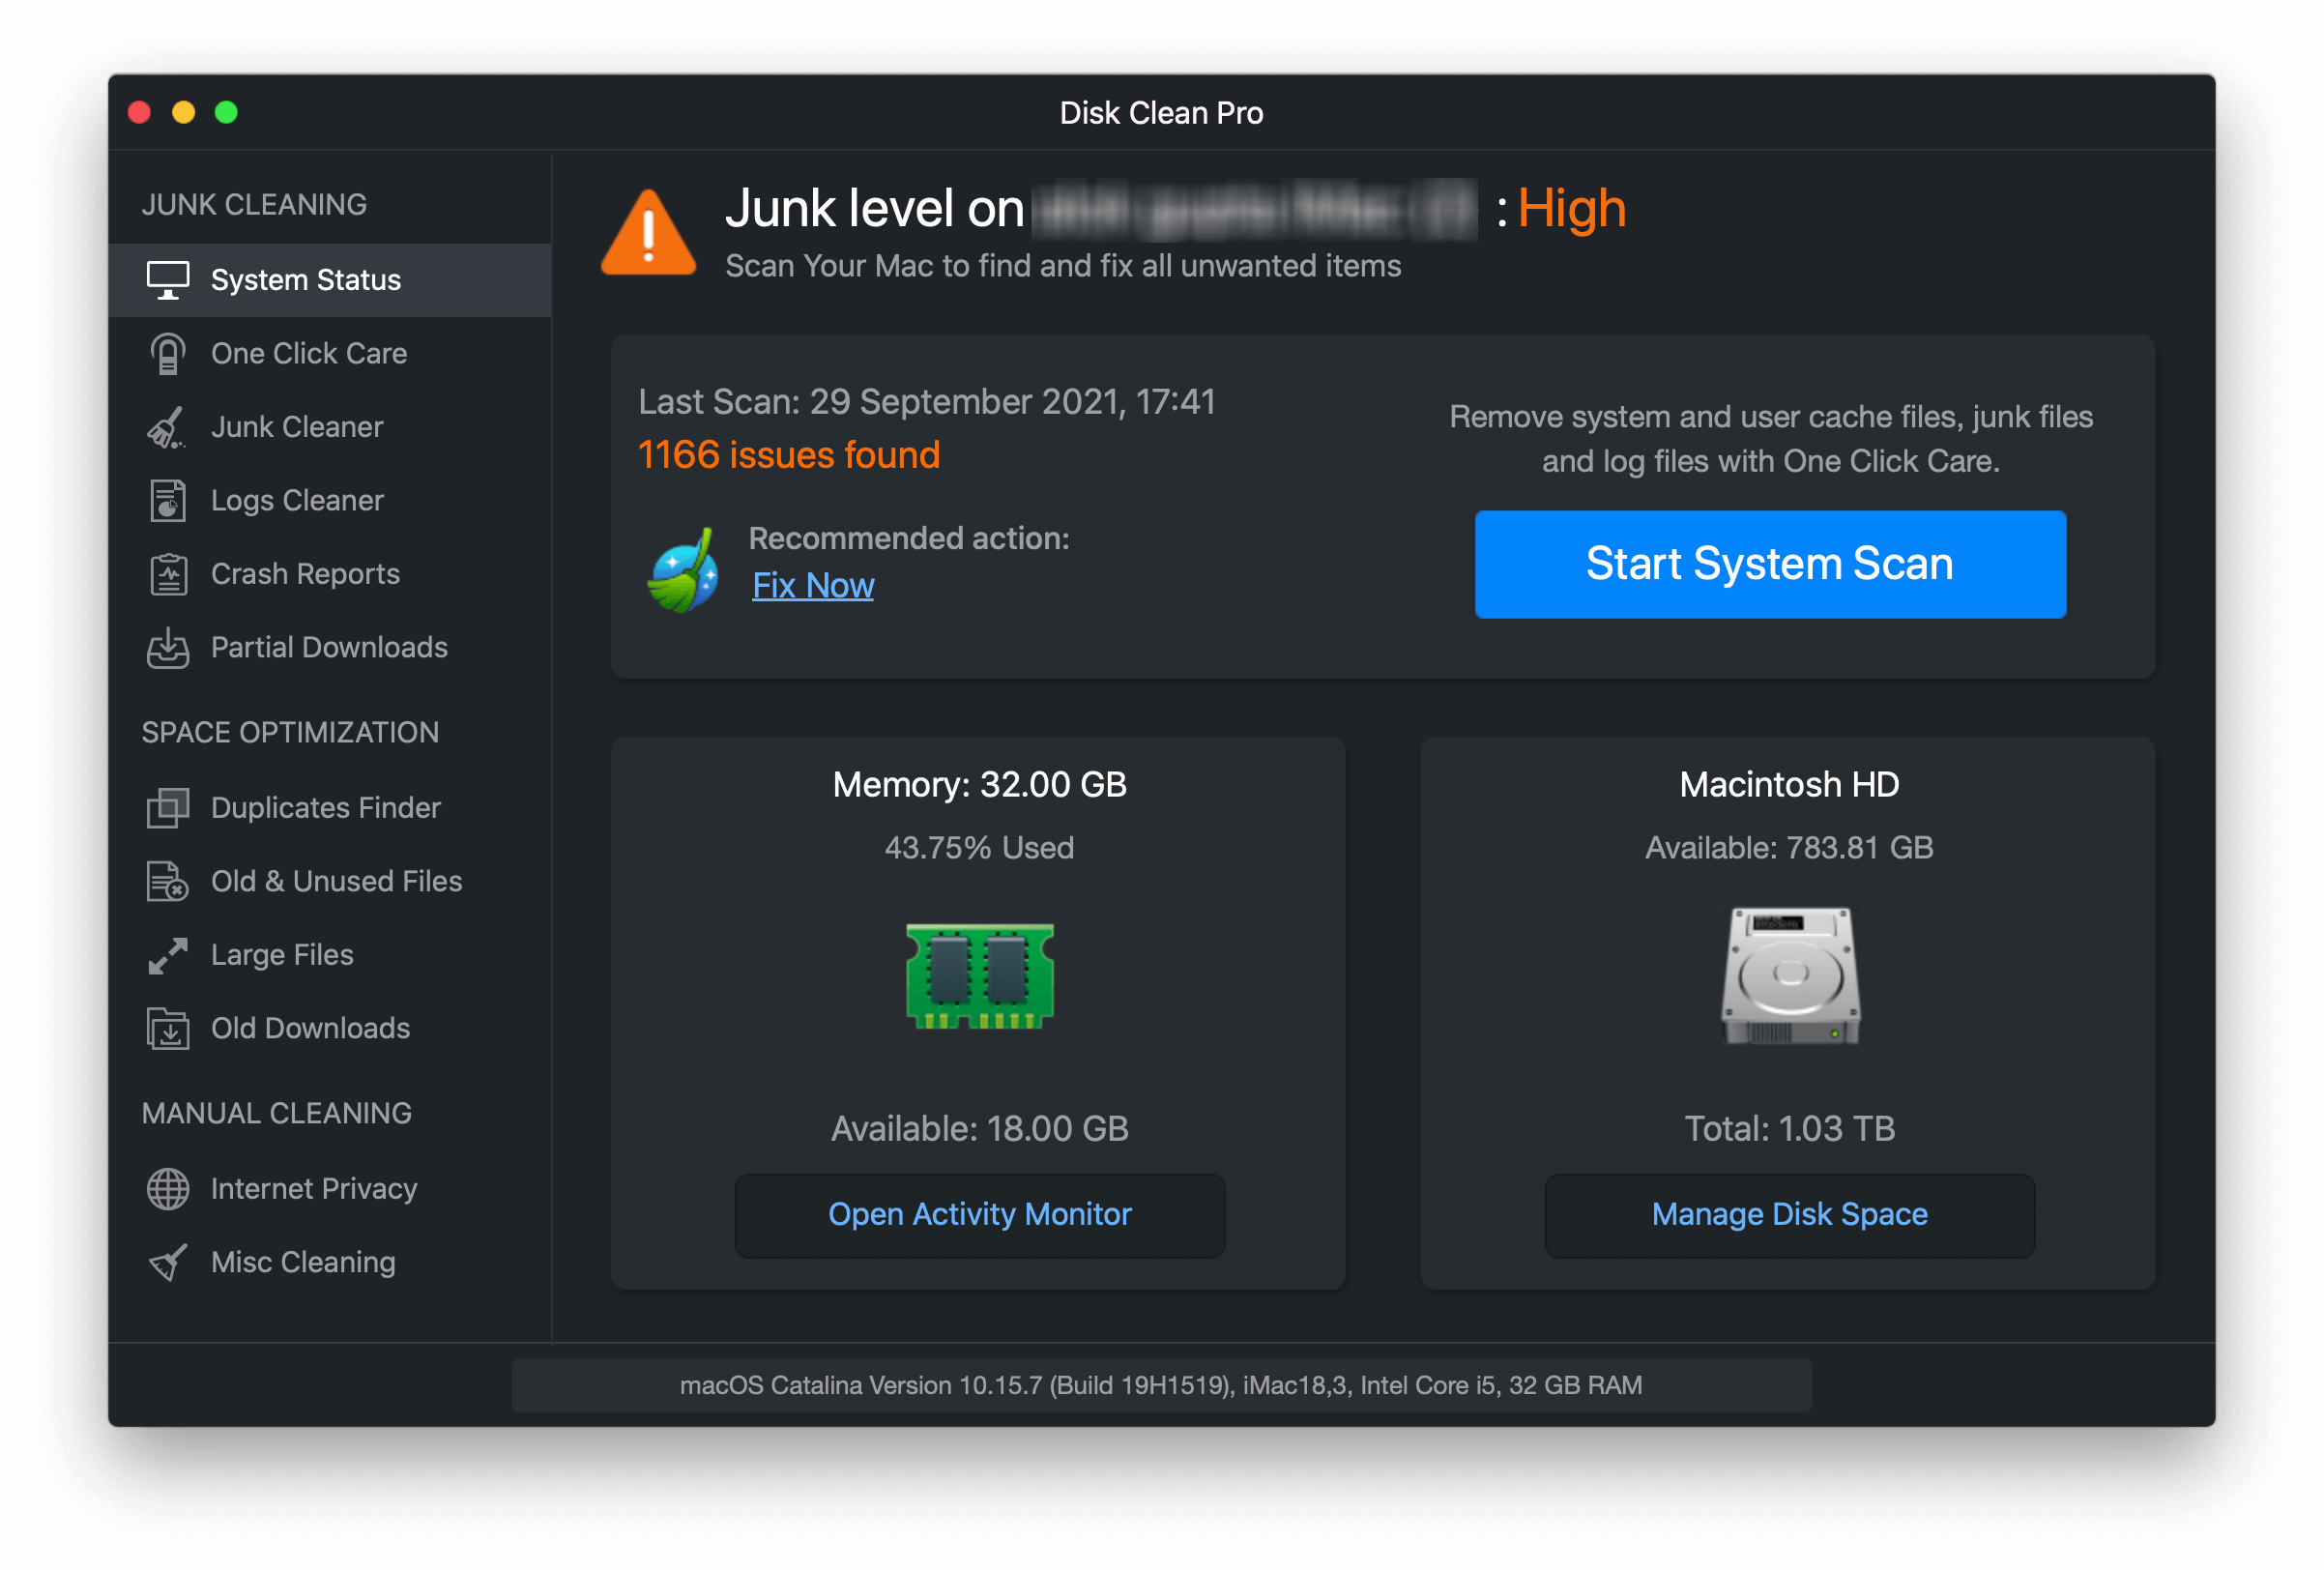 Disk Clean Pro - System Status